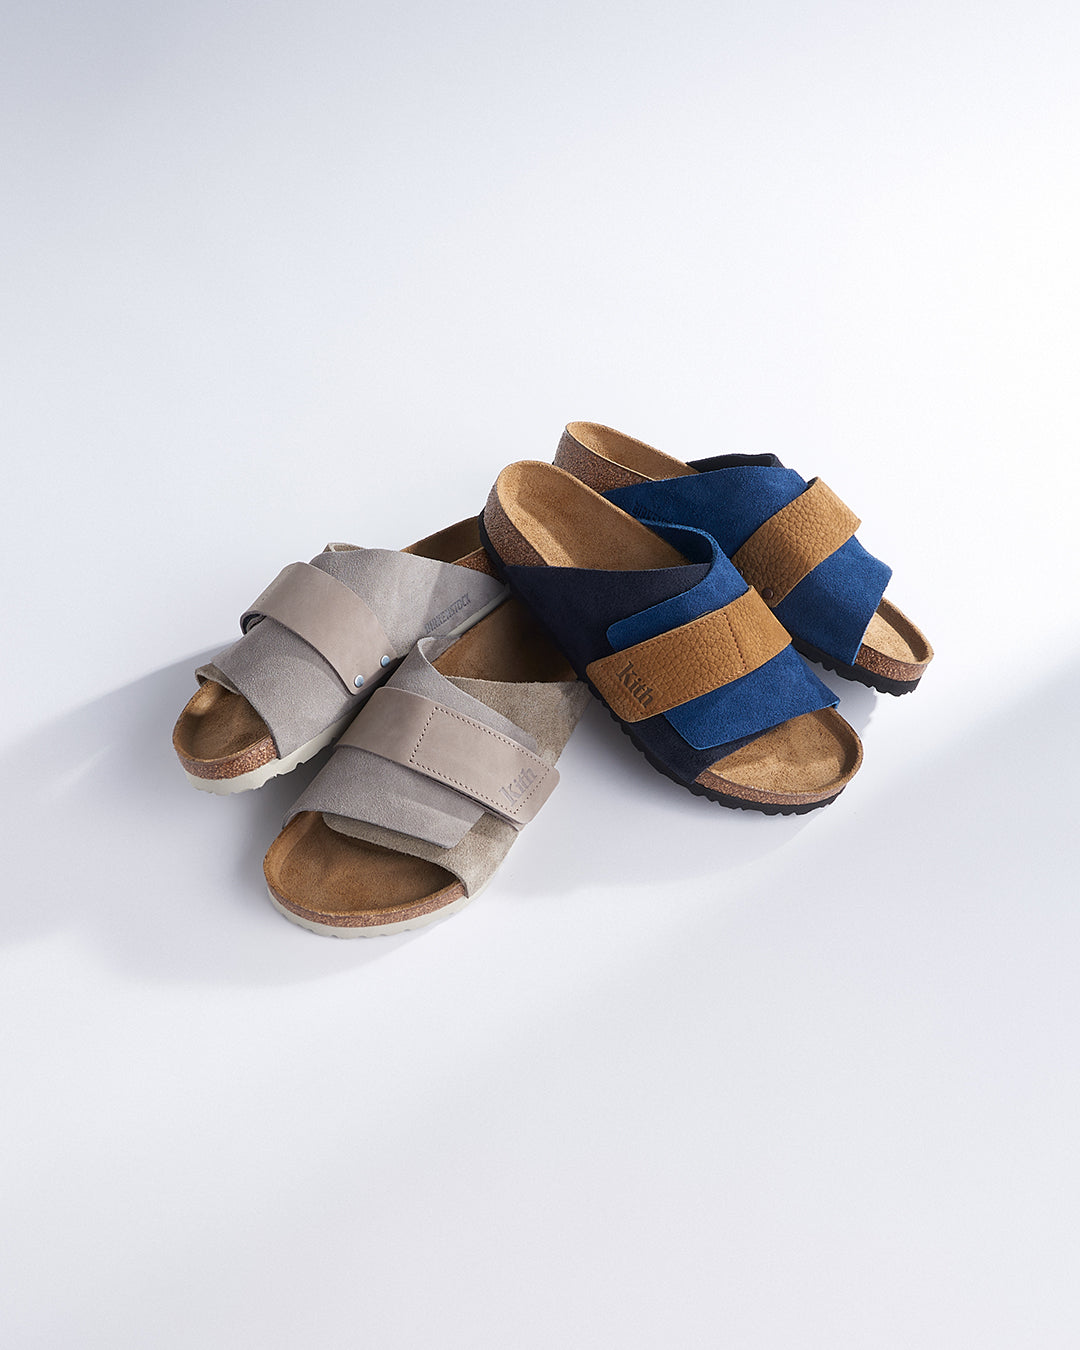 Releasing with Summer 2 is our latest partnership with Birkenstock